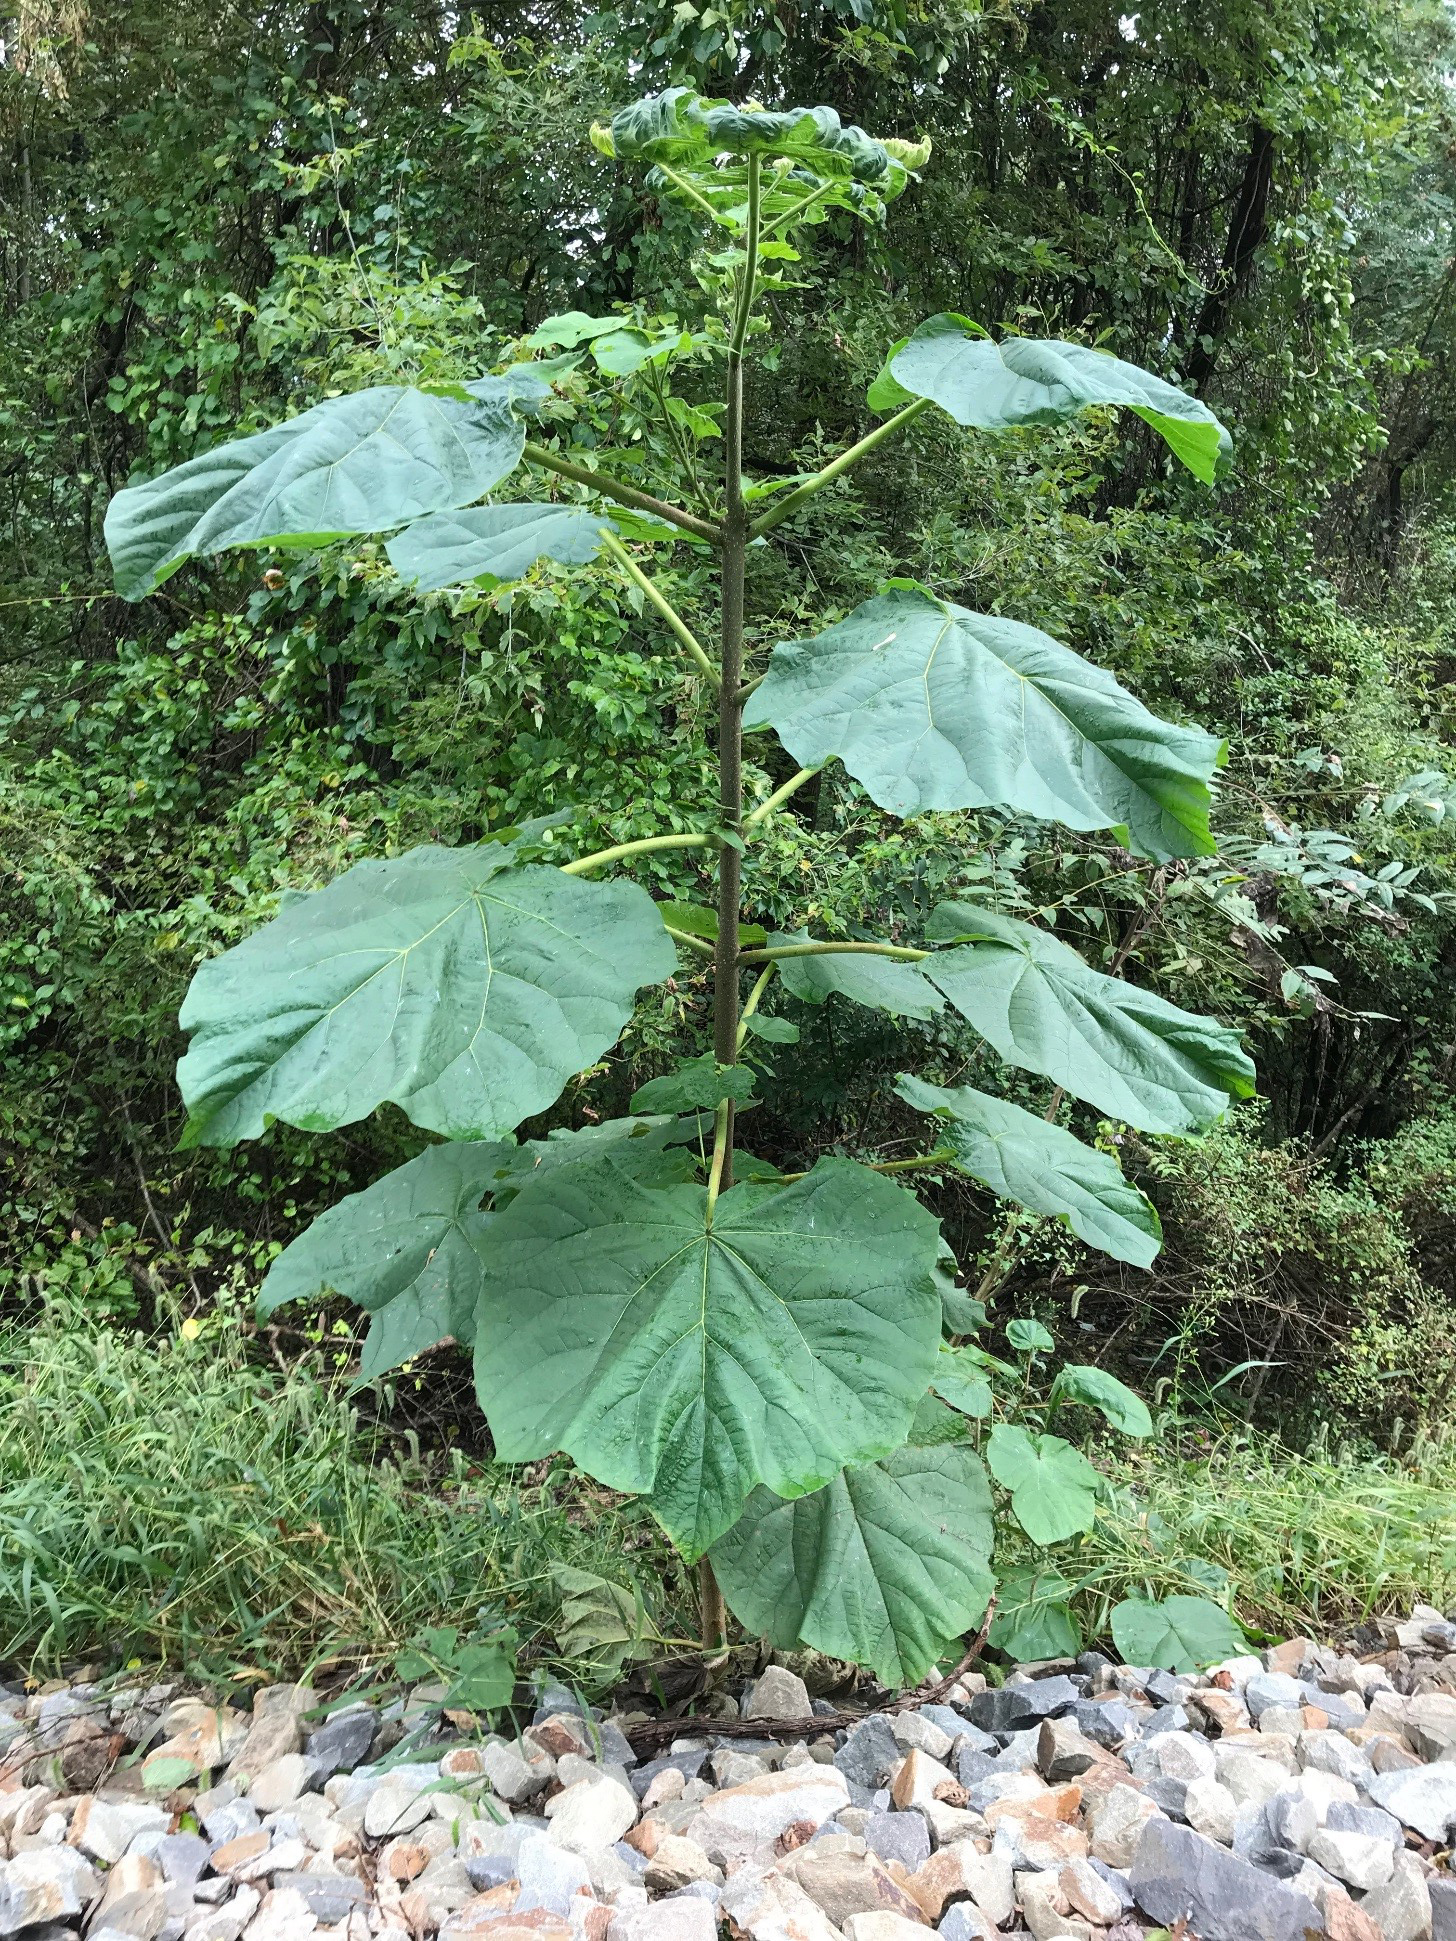 talk plant stalk with large broad leaves